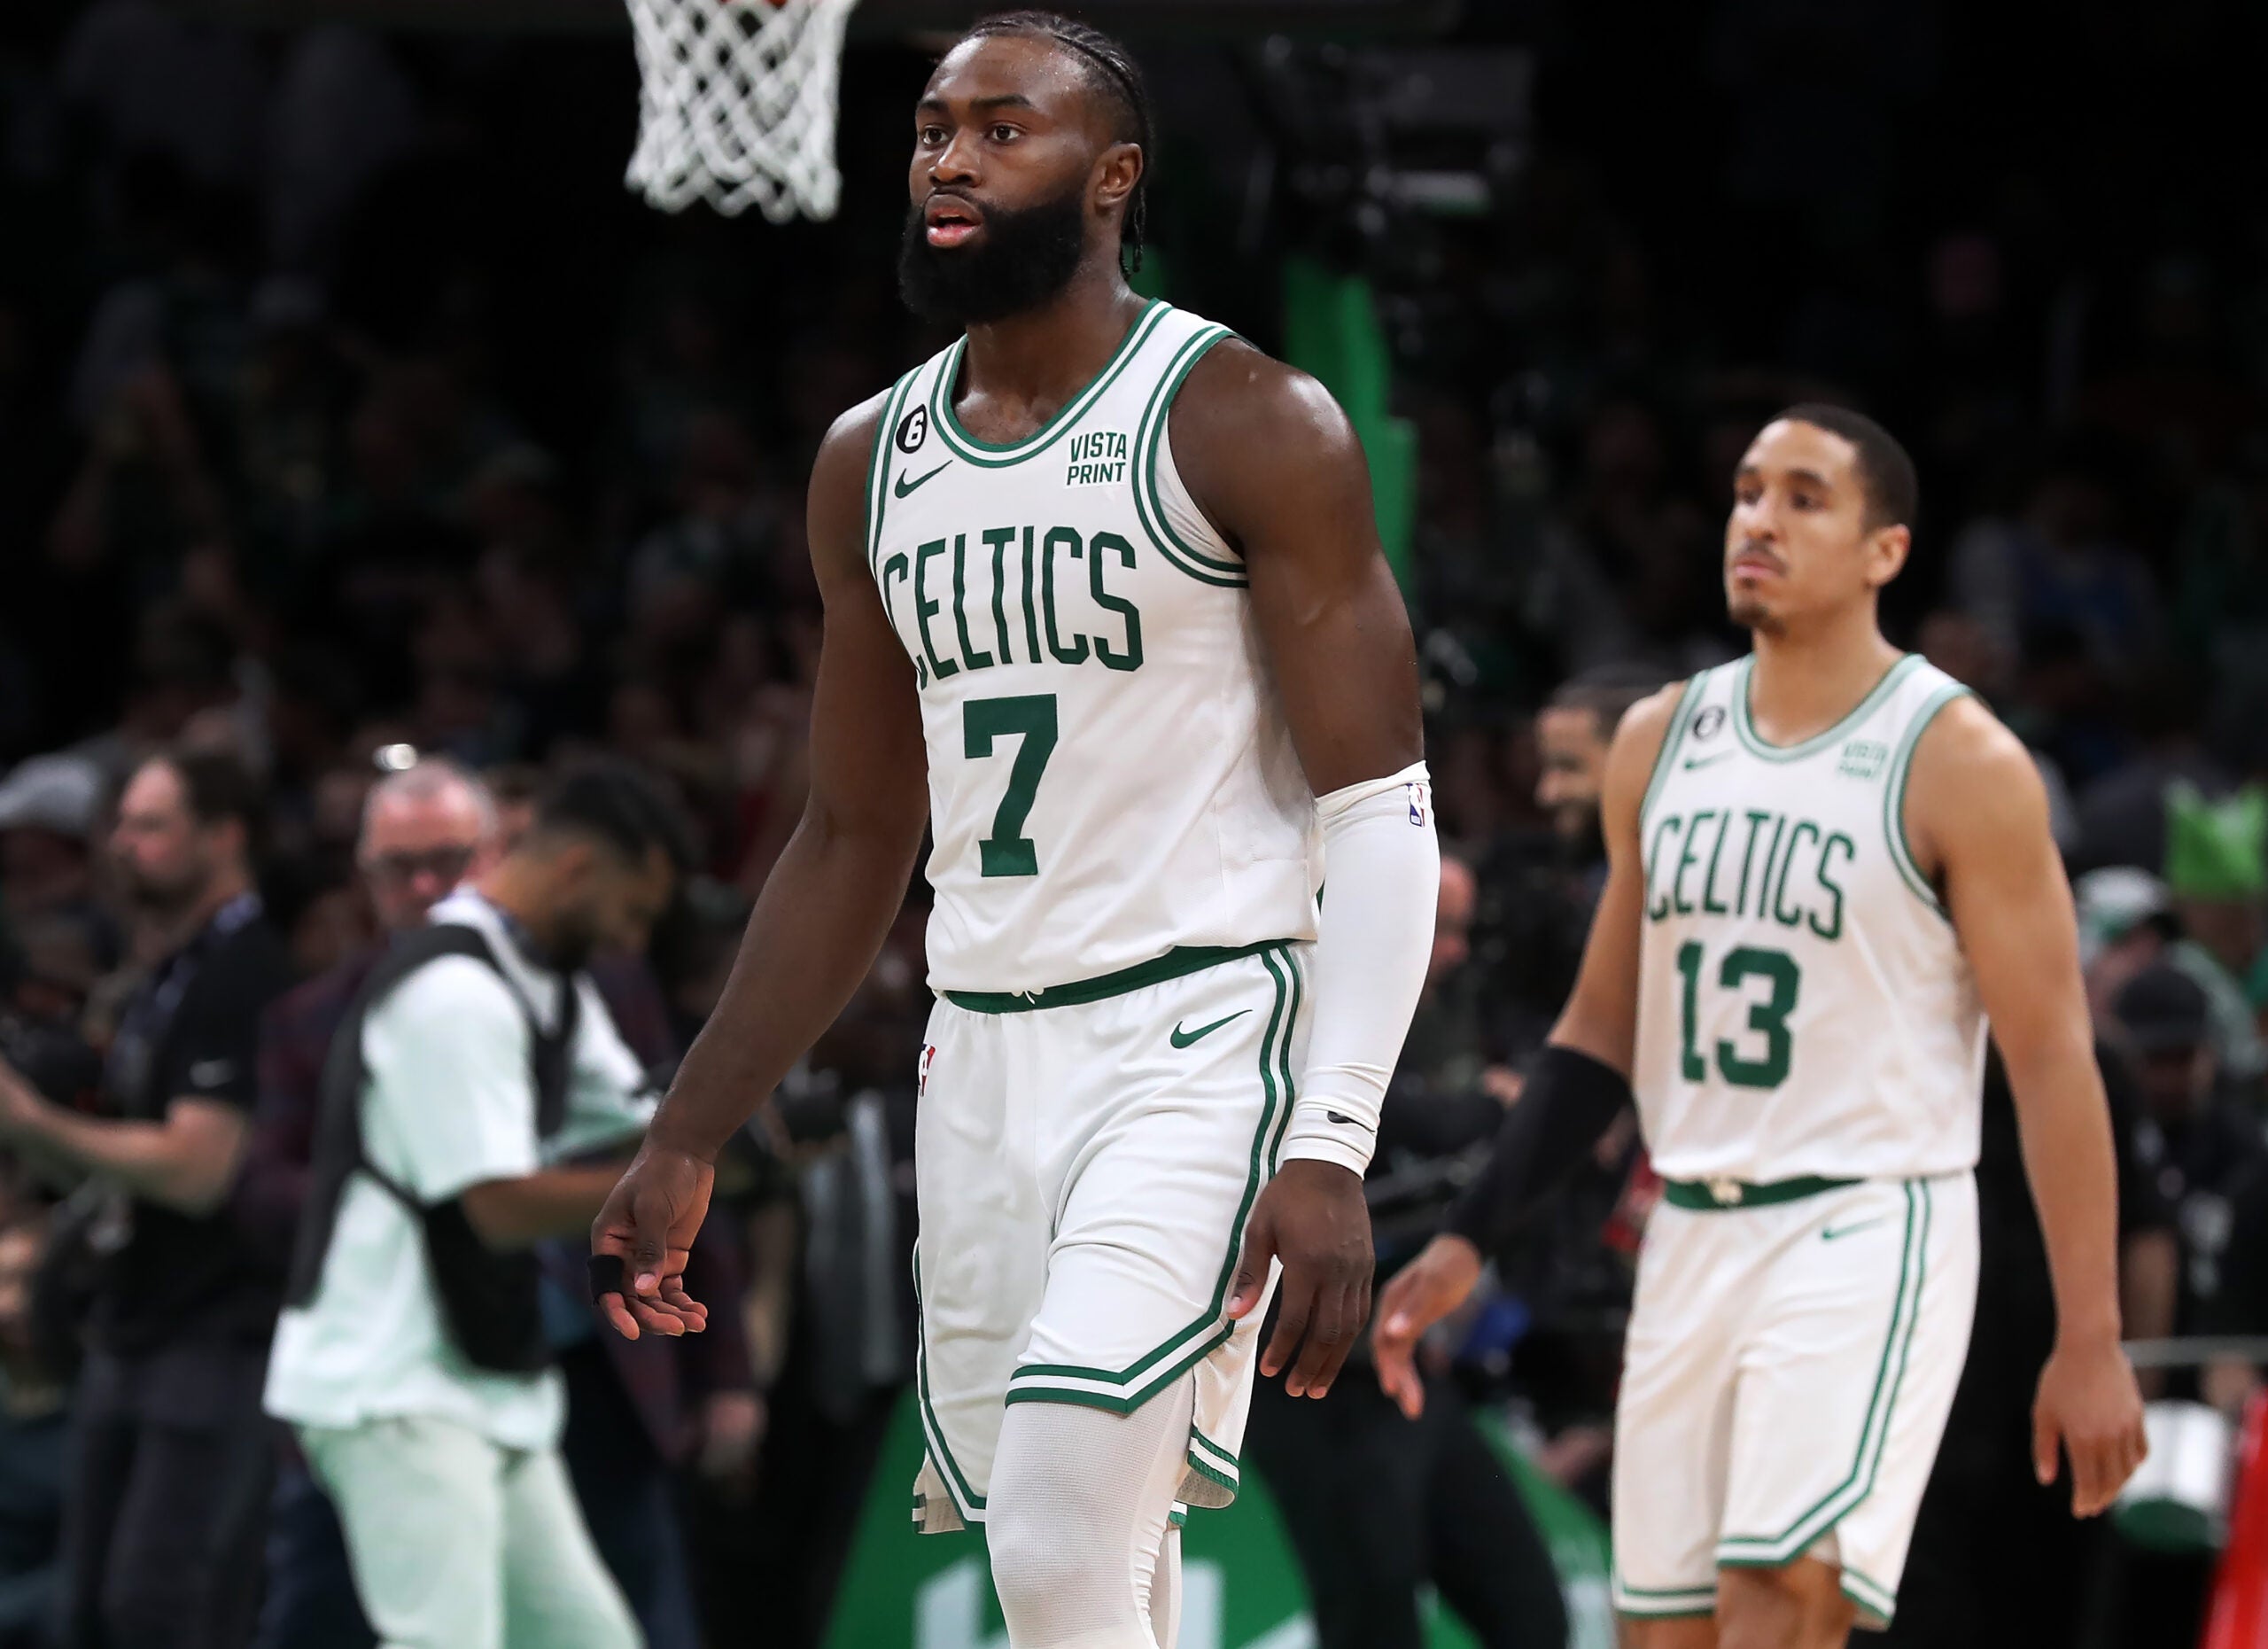 The Celtics Jaylen Brown (7) and Malcolm Brogdon (13) head off the court after the final horn sounded in Boston's loss.The Boston Celtics hosted the Miami Heat for Game Two of their NBA Eastern ConferenceFinals series at the TD Garden.